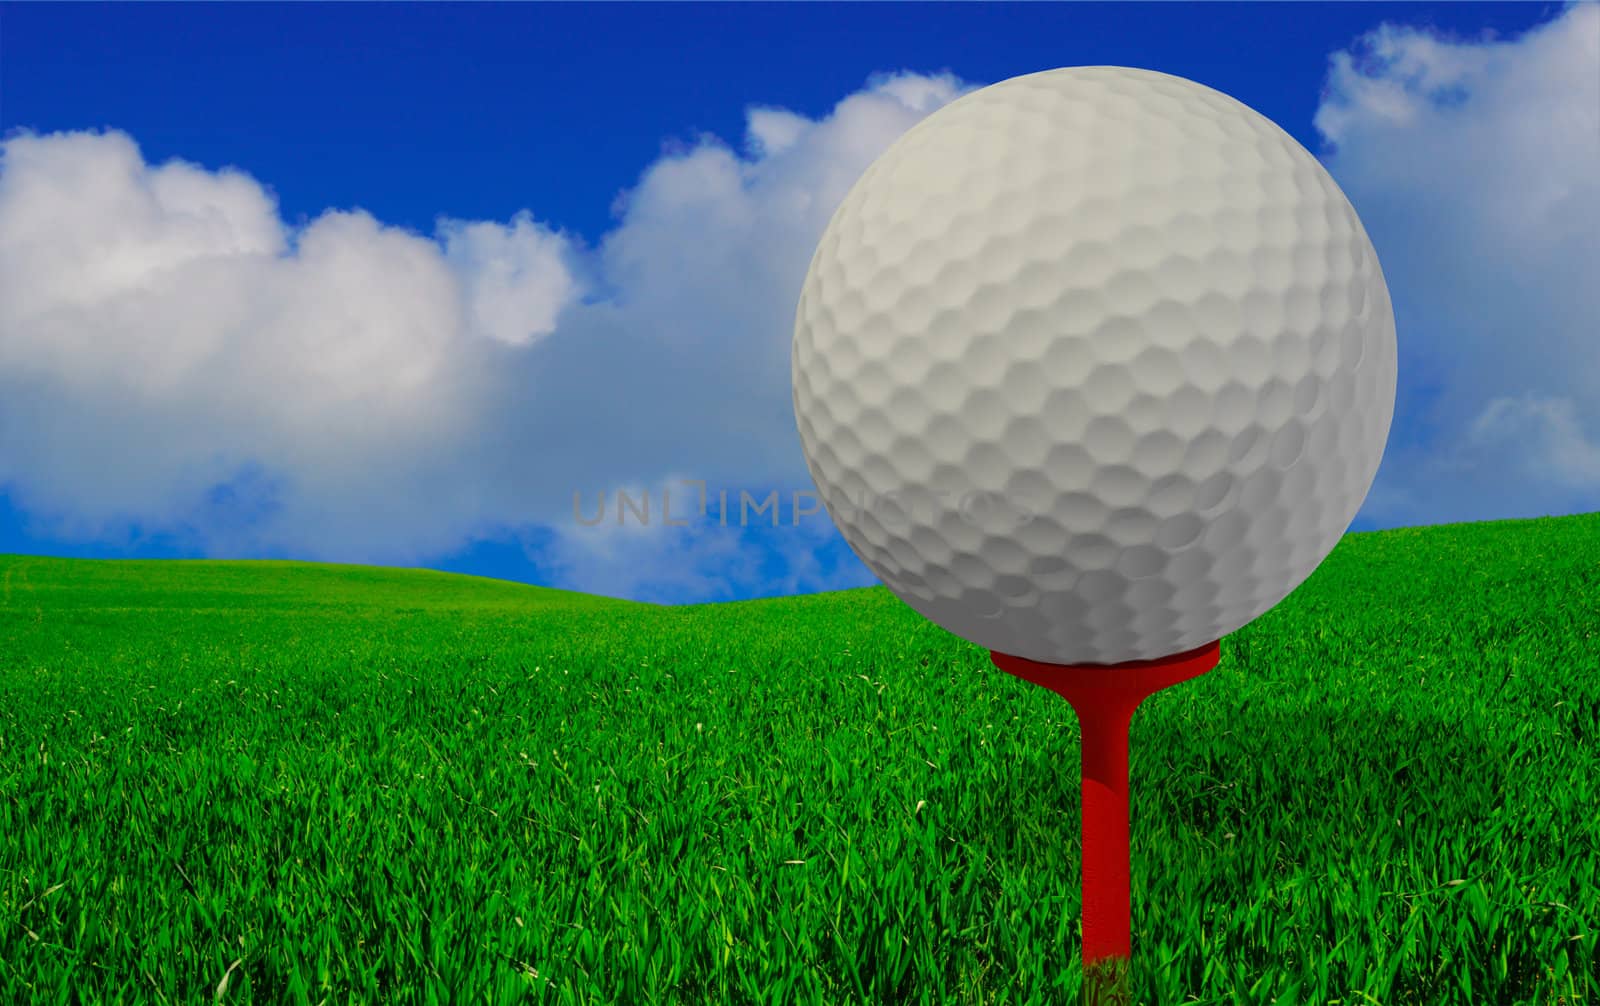 Beautiful golfers view vith golfball on peg and perfect green grass and blue sky